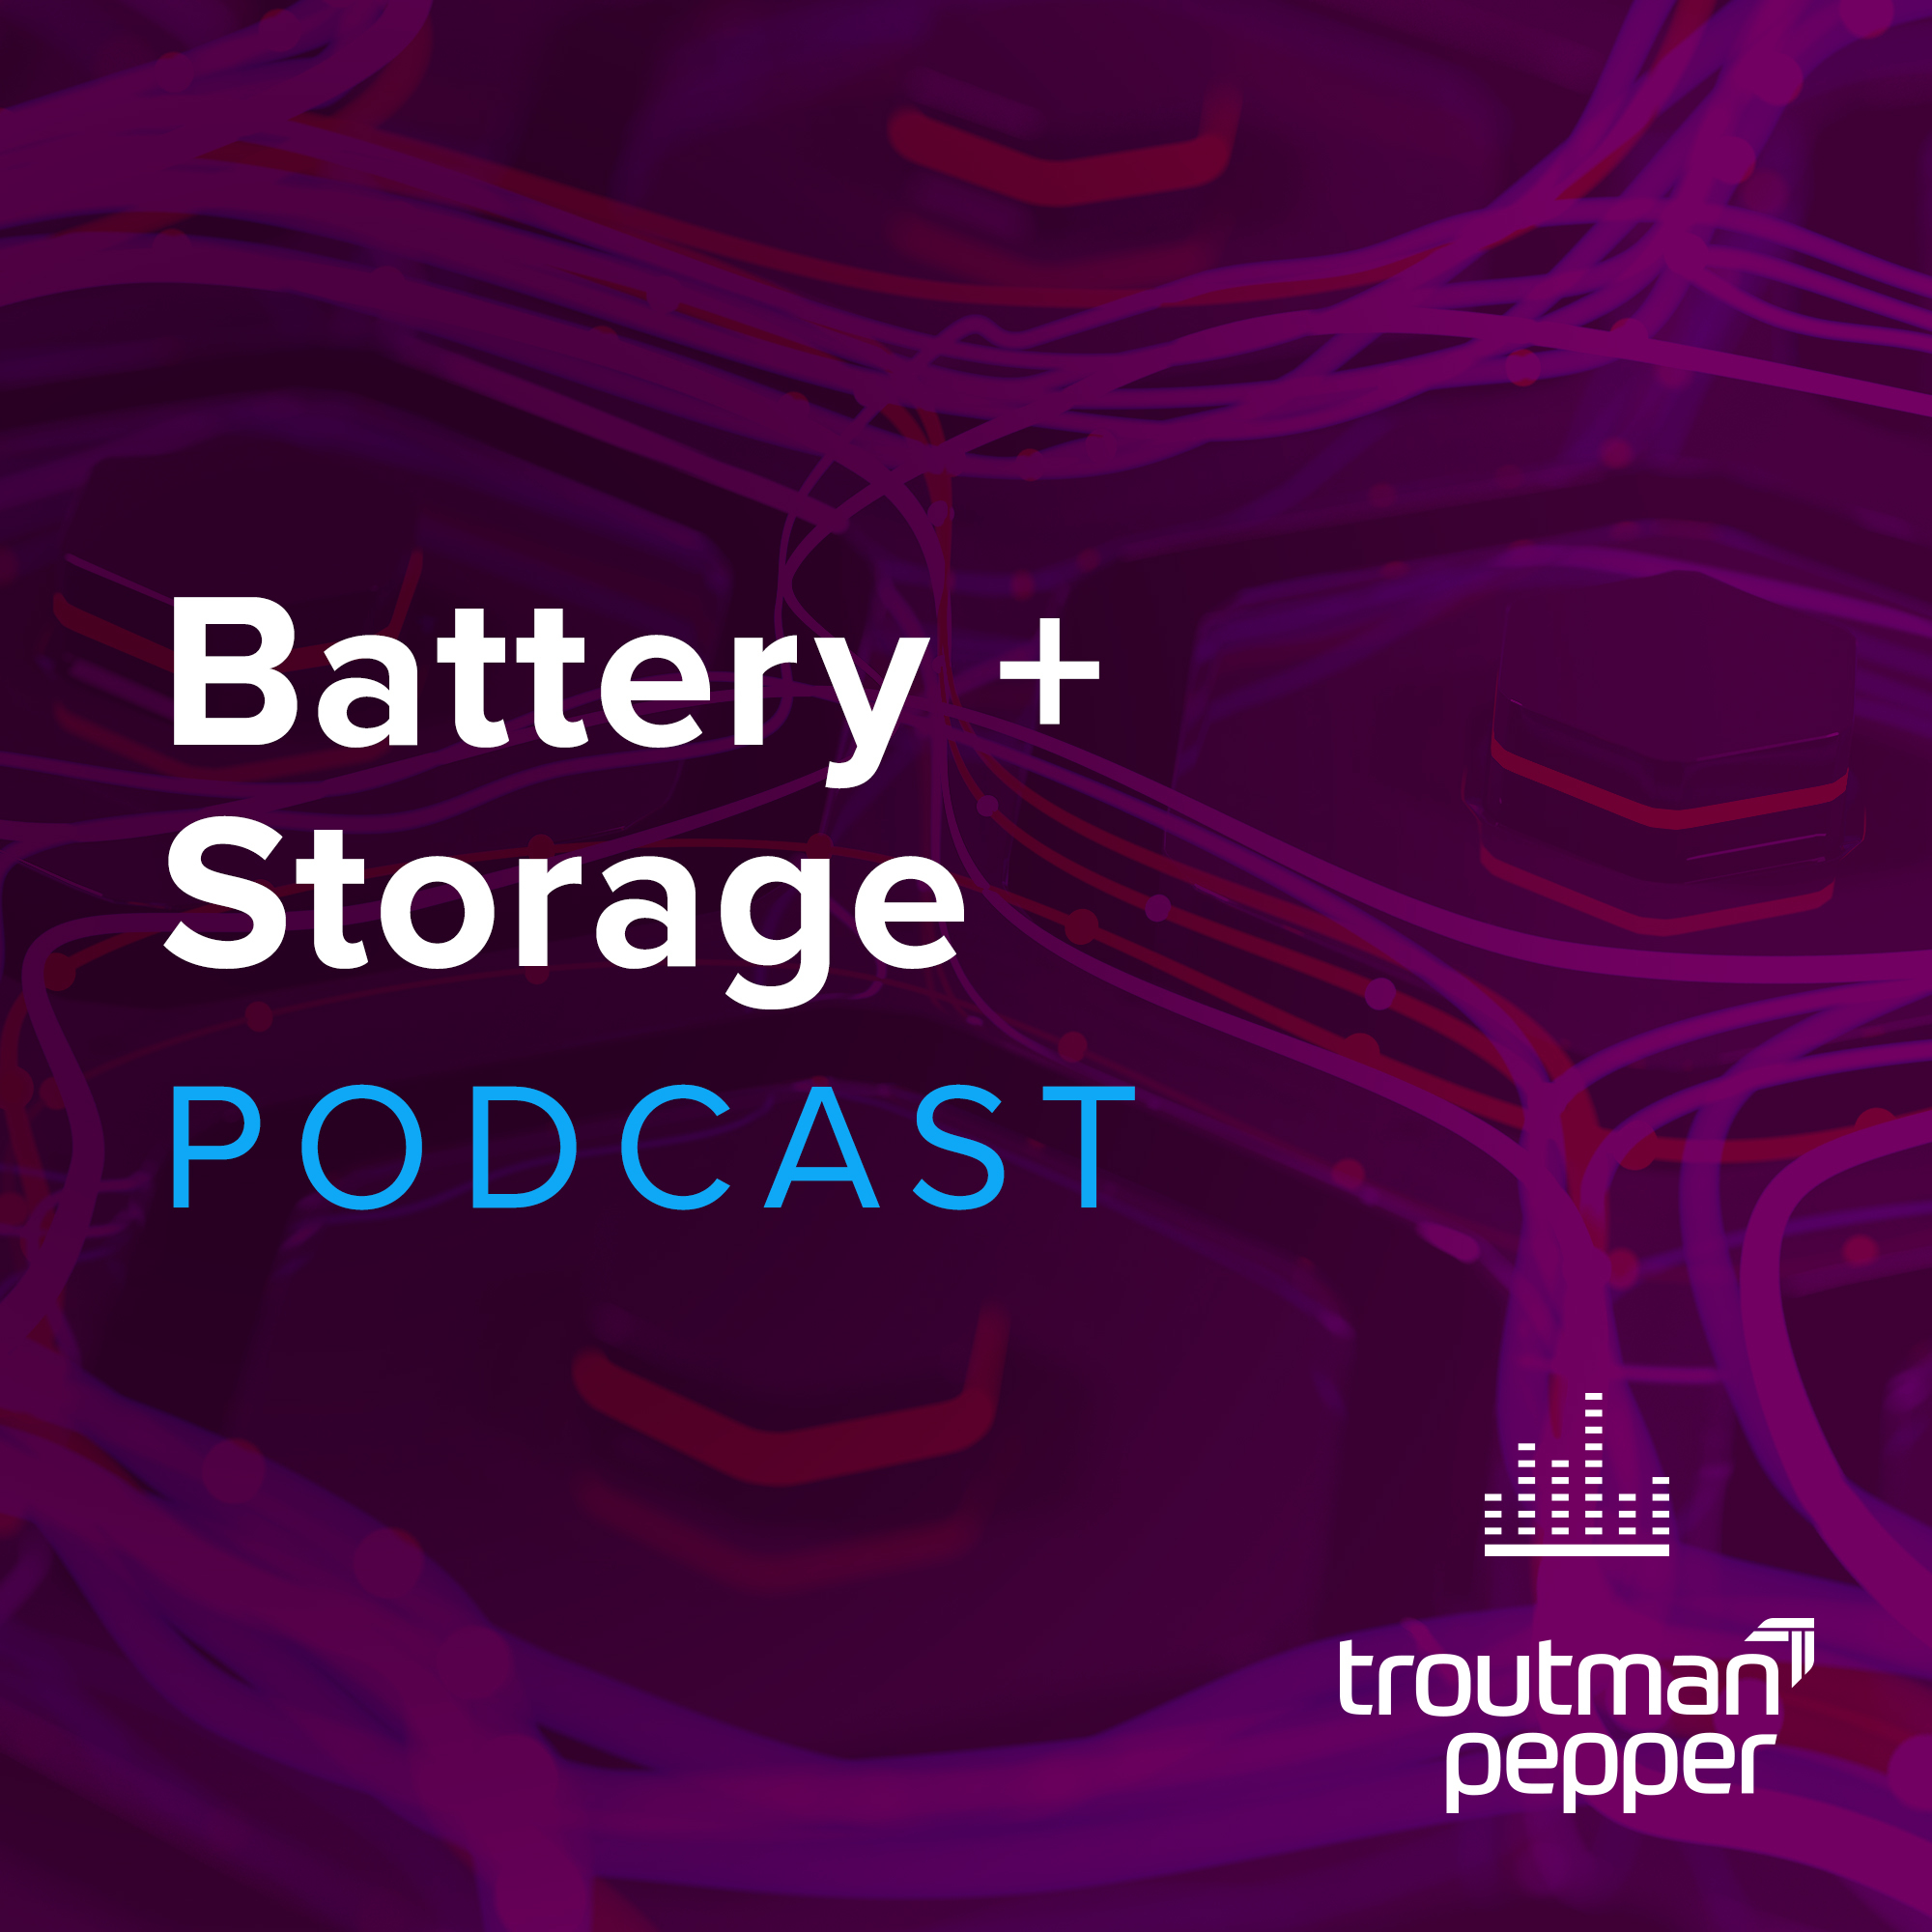 Troutman Pepper Battery + Storage Podcast Graphic